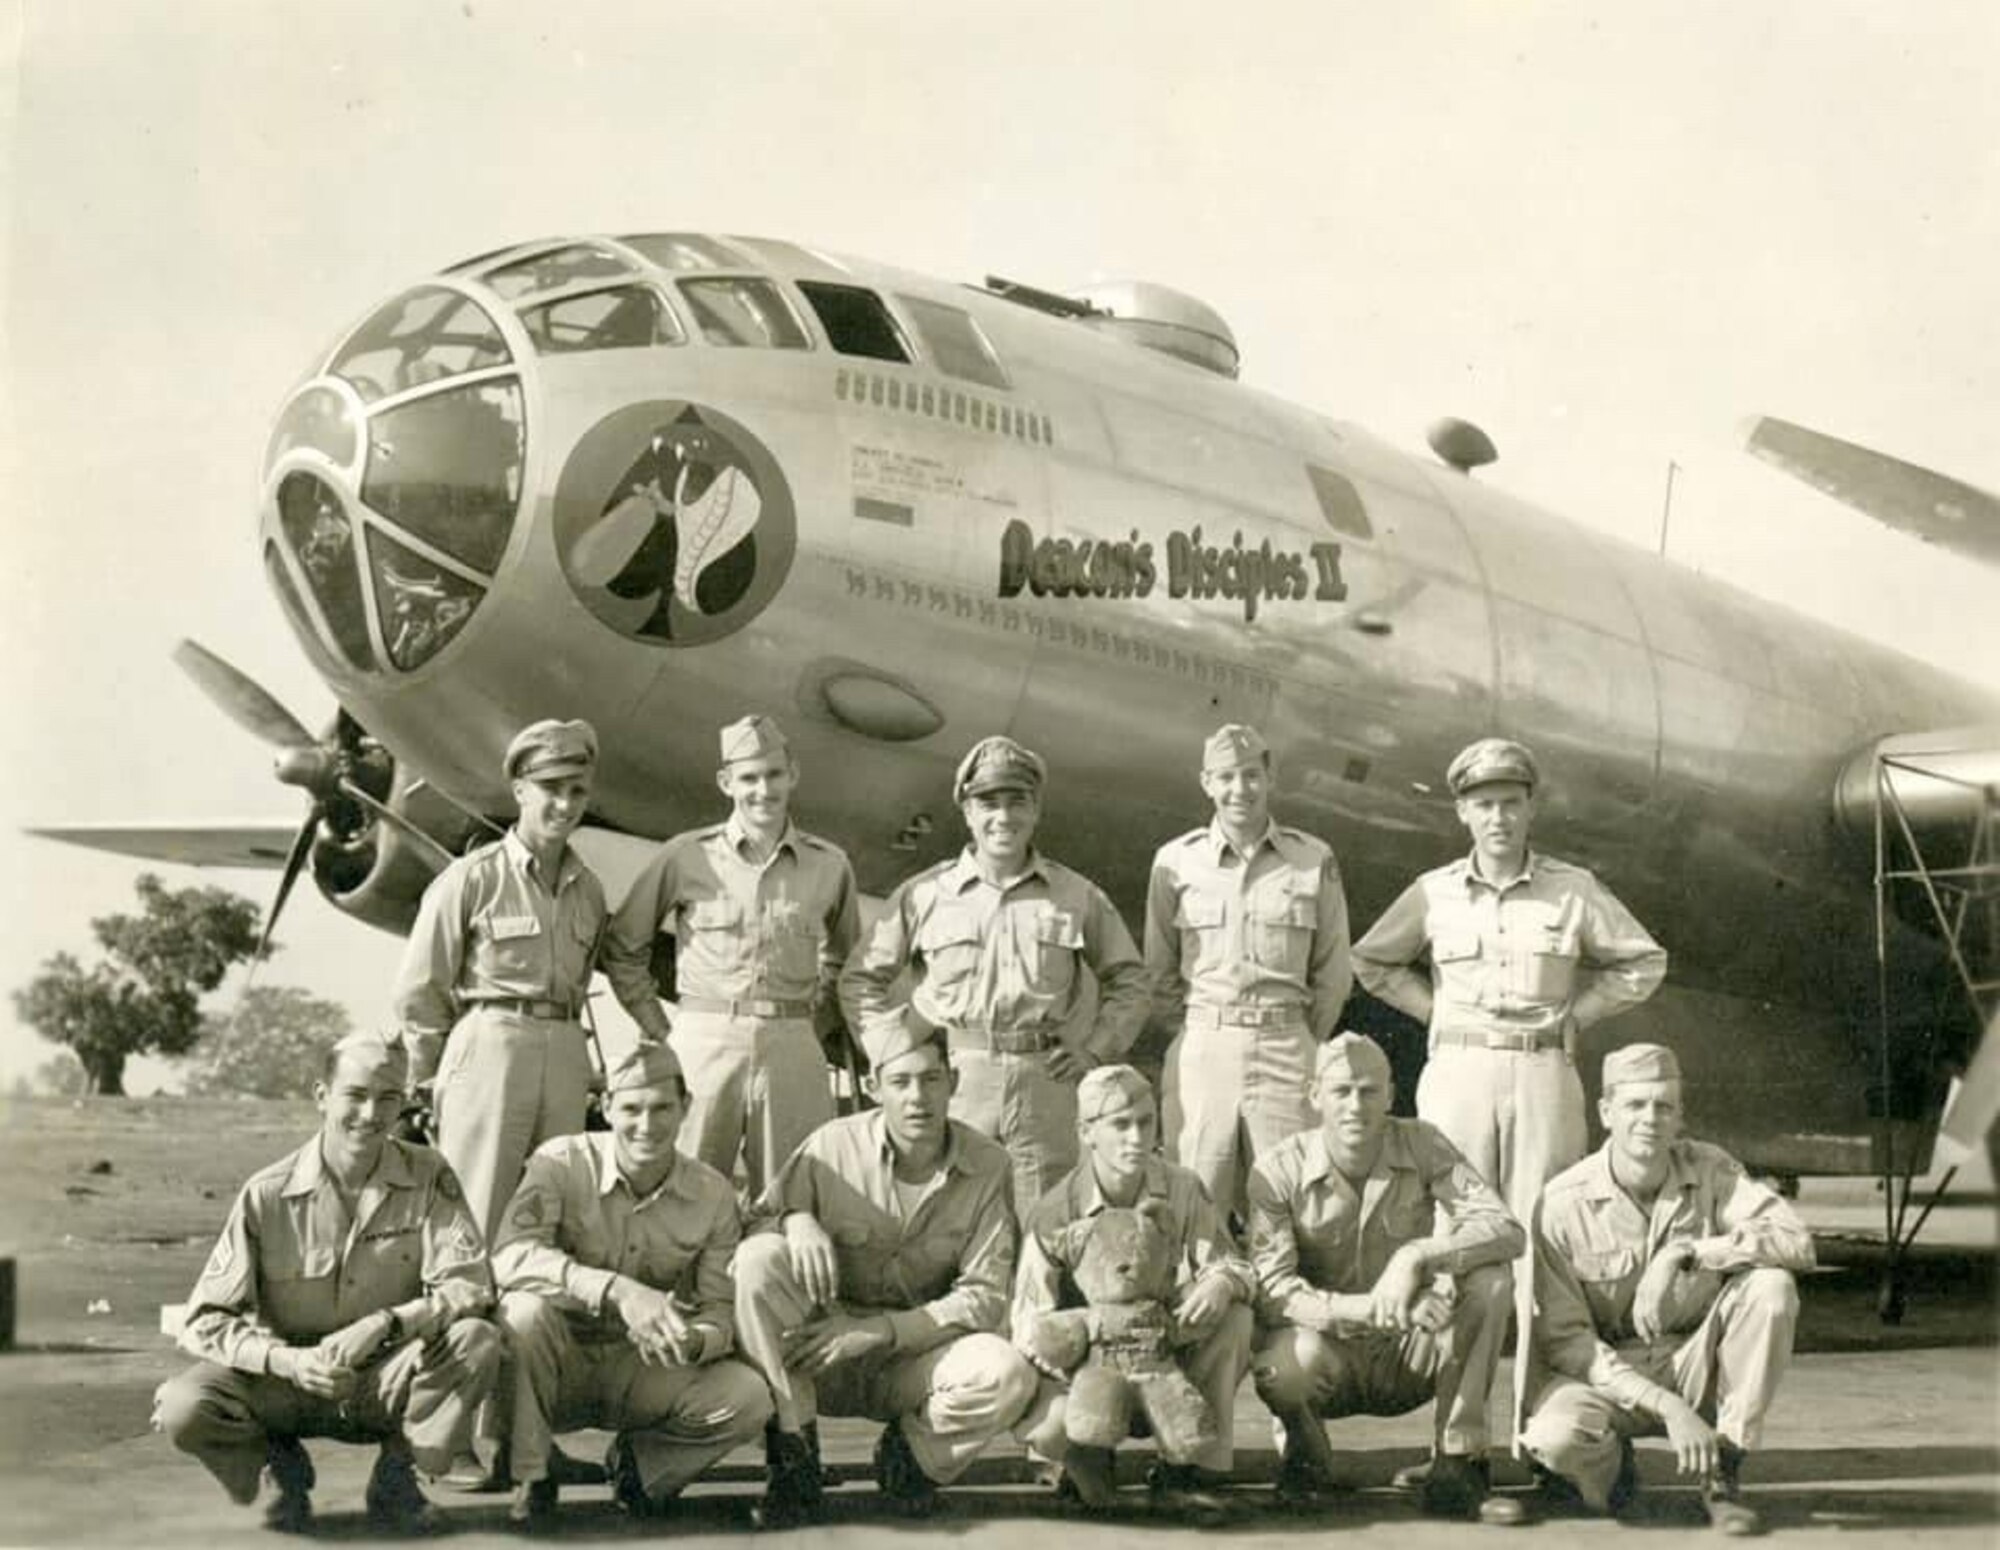 Group photo of Airmen standing in front of an aircraft.